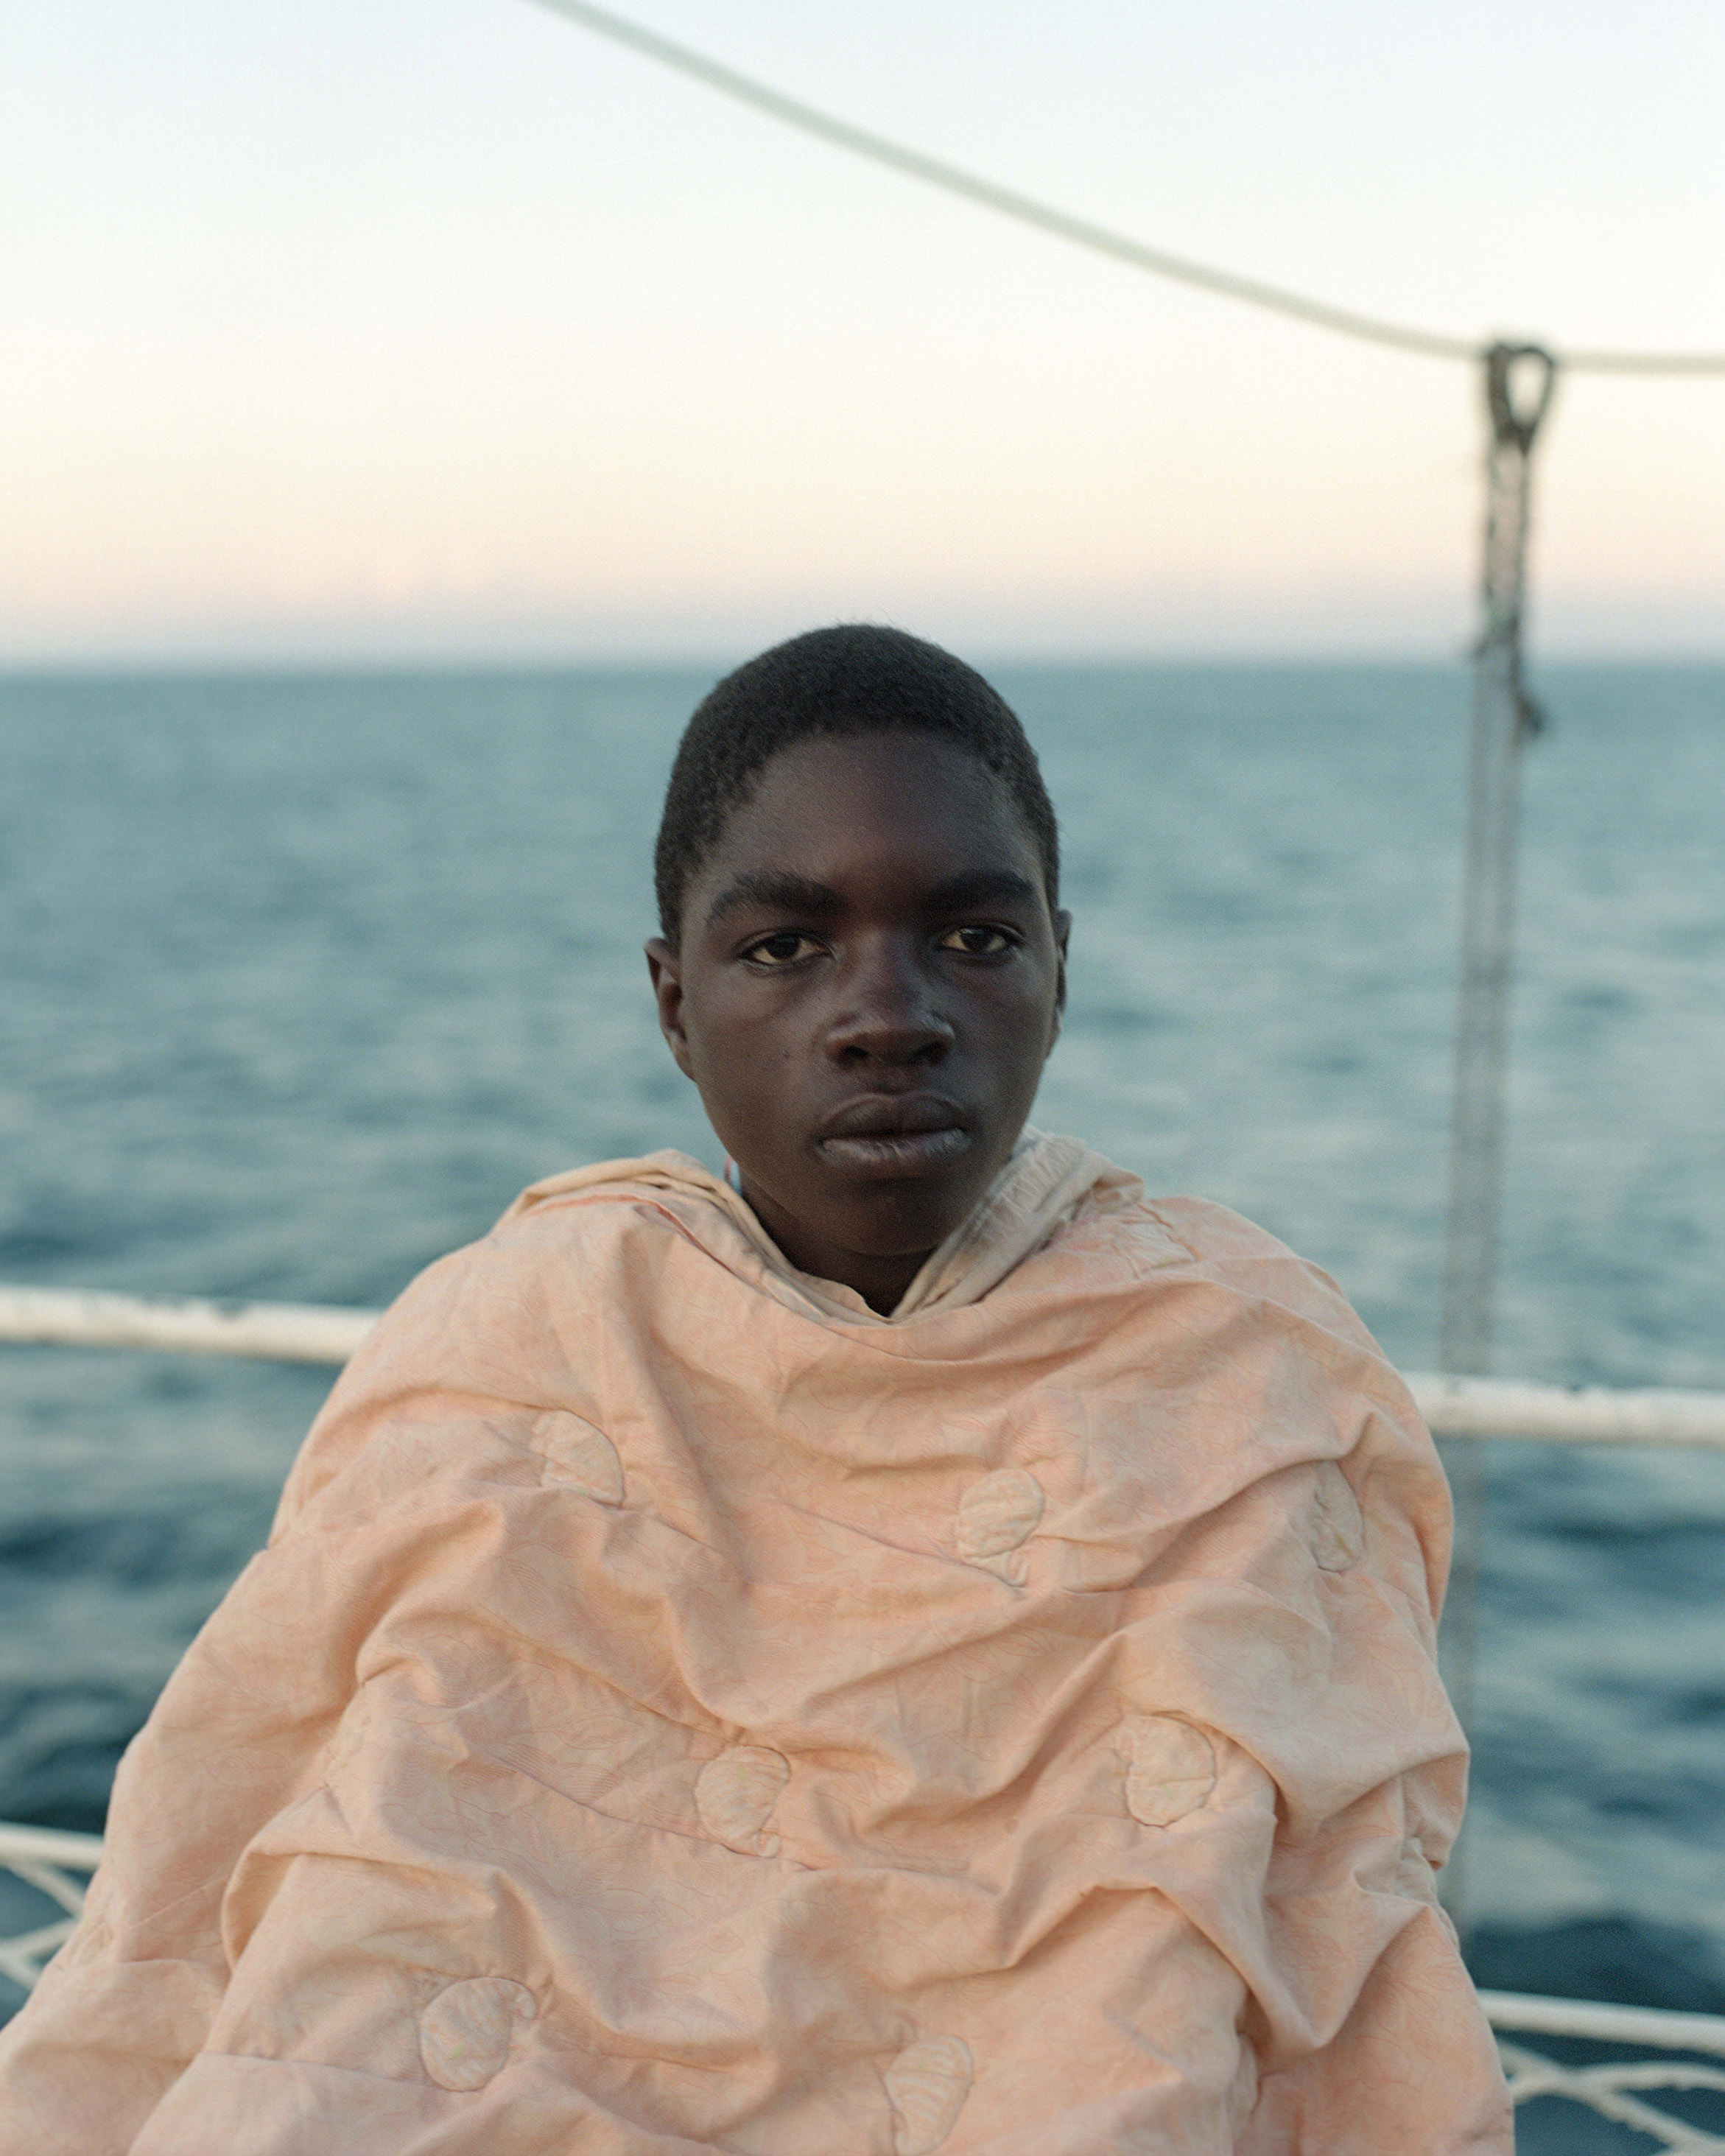 Taylor Wessing Prize Portraits at NPG - Theodore Clarke